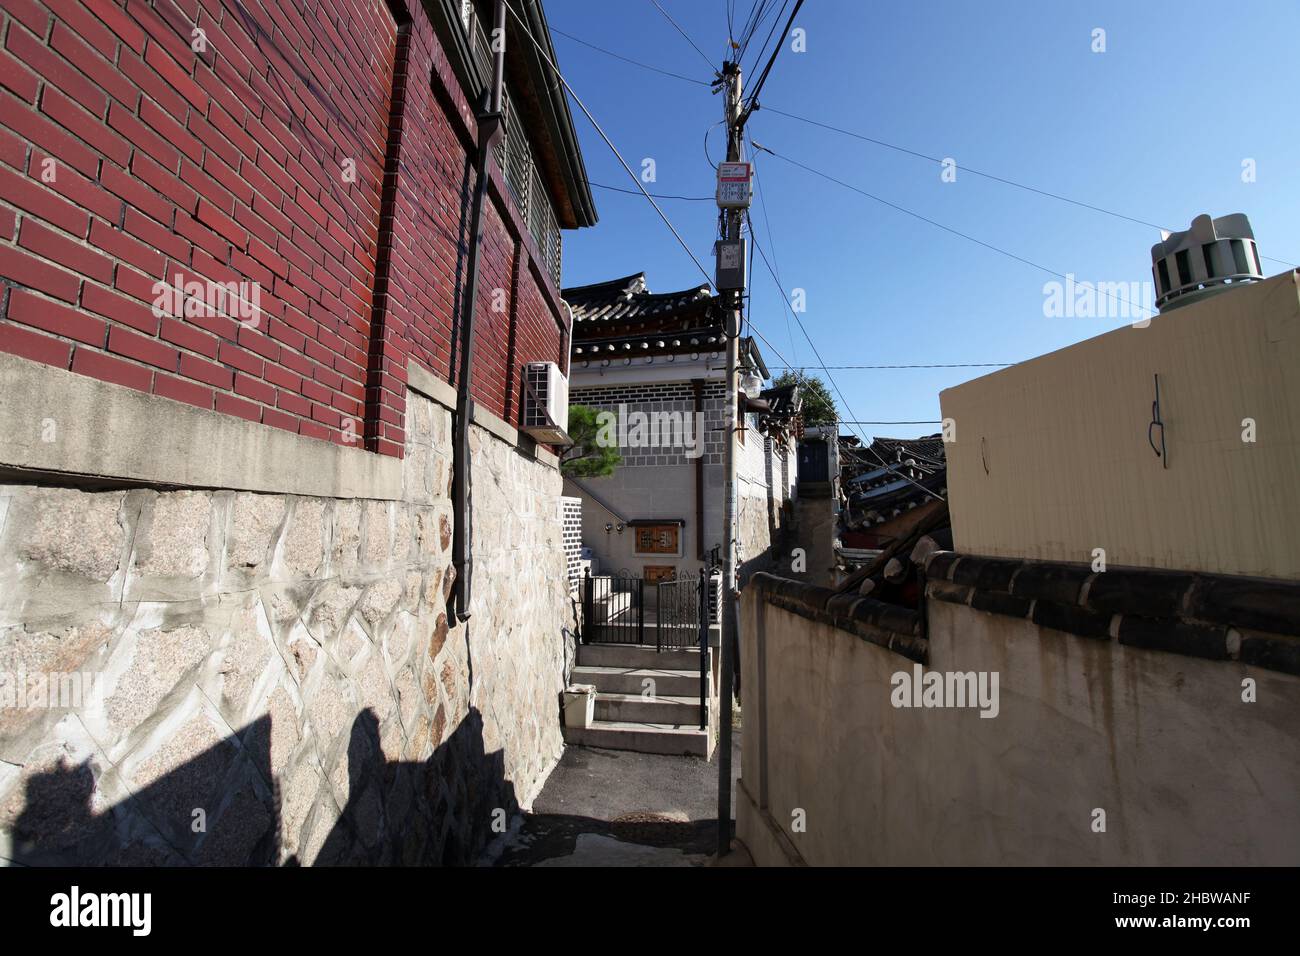 Bukchon Hanok Village in Seoul, South Korean, with traditionally built houses in the old Hanok style. Stock Photo